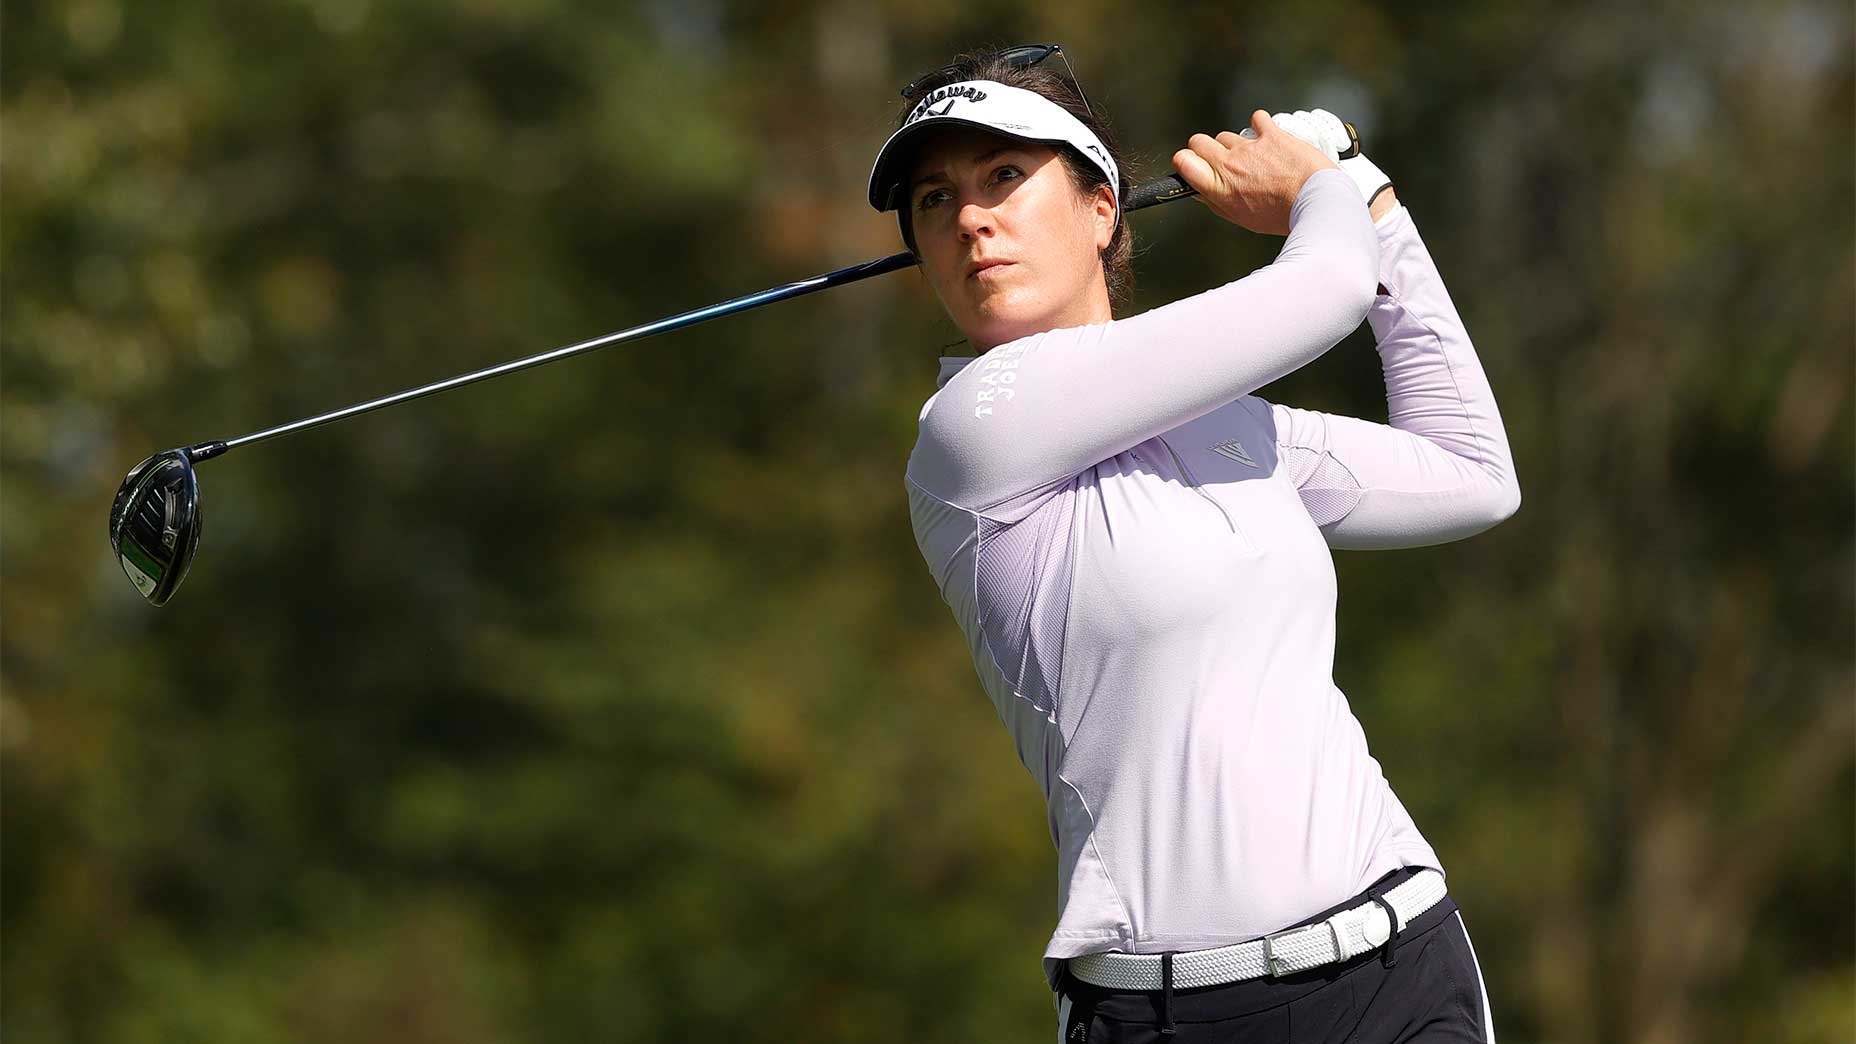 How to manage expectations on the golf course, according to an LPGA pro ...